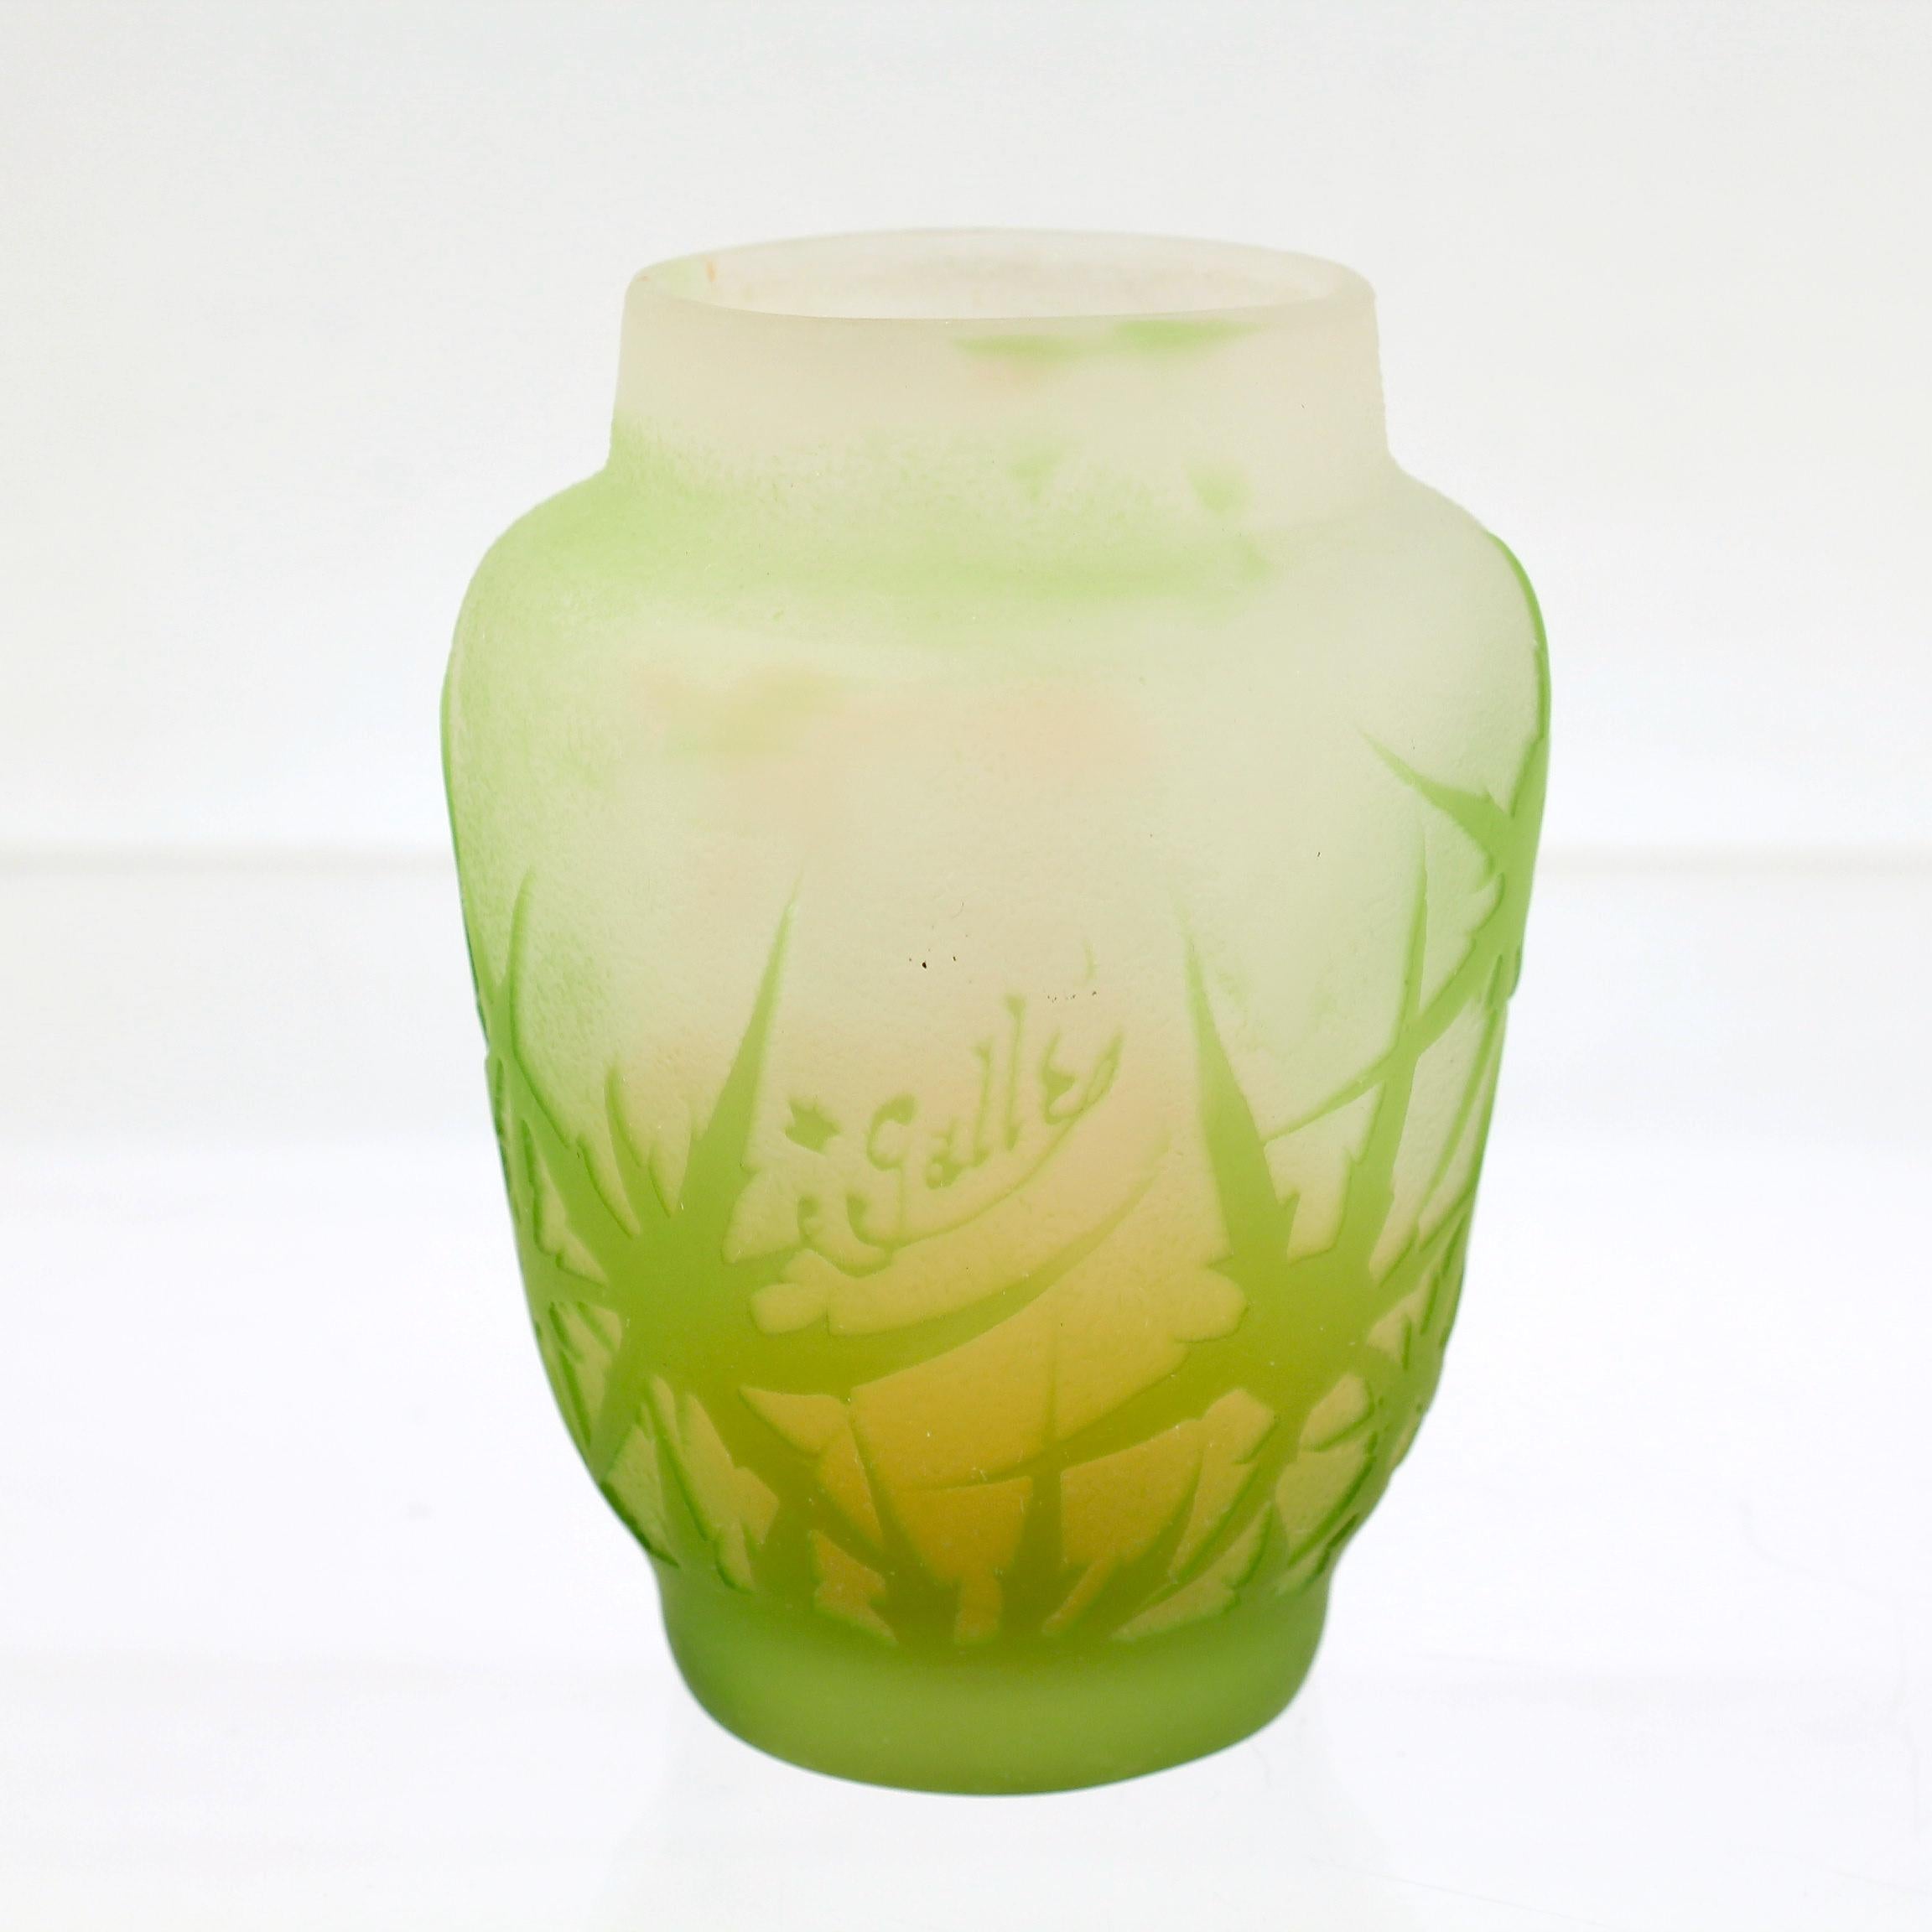 A fine signed, diminuitive Galle vase.

In an acid-cut green thistle pattern over a delicate salmon pink to clear frosted interior.

Signed in the decoration 'Galle'. Bearing a wax pencil mark to the base '35'.

Simply a wonderful cabinet